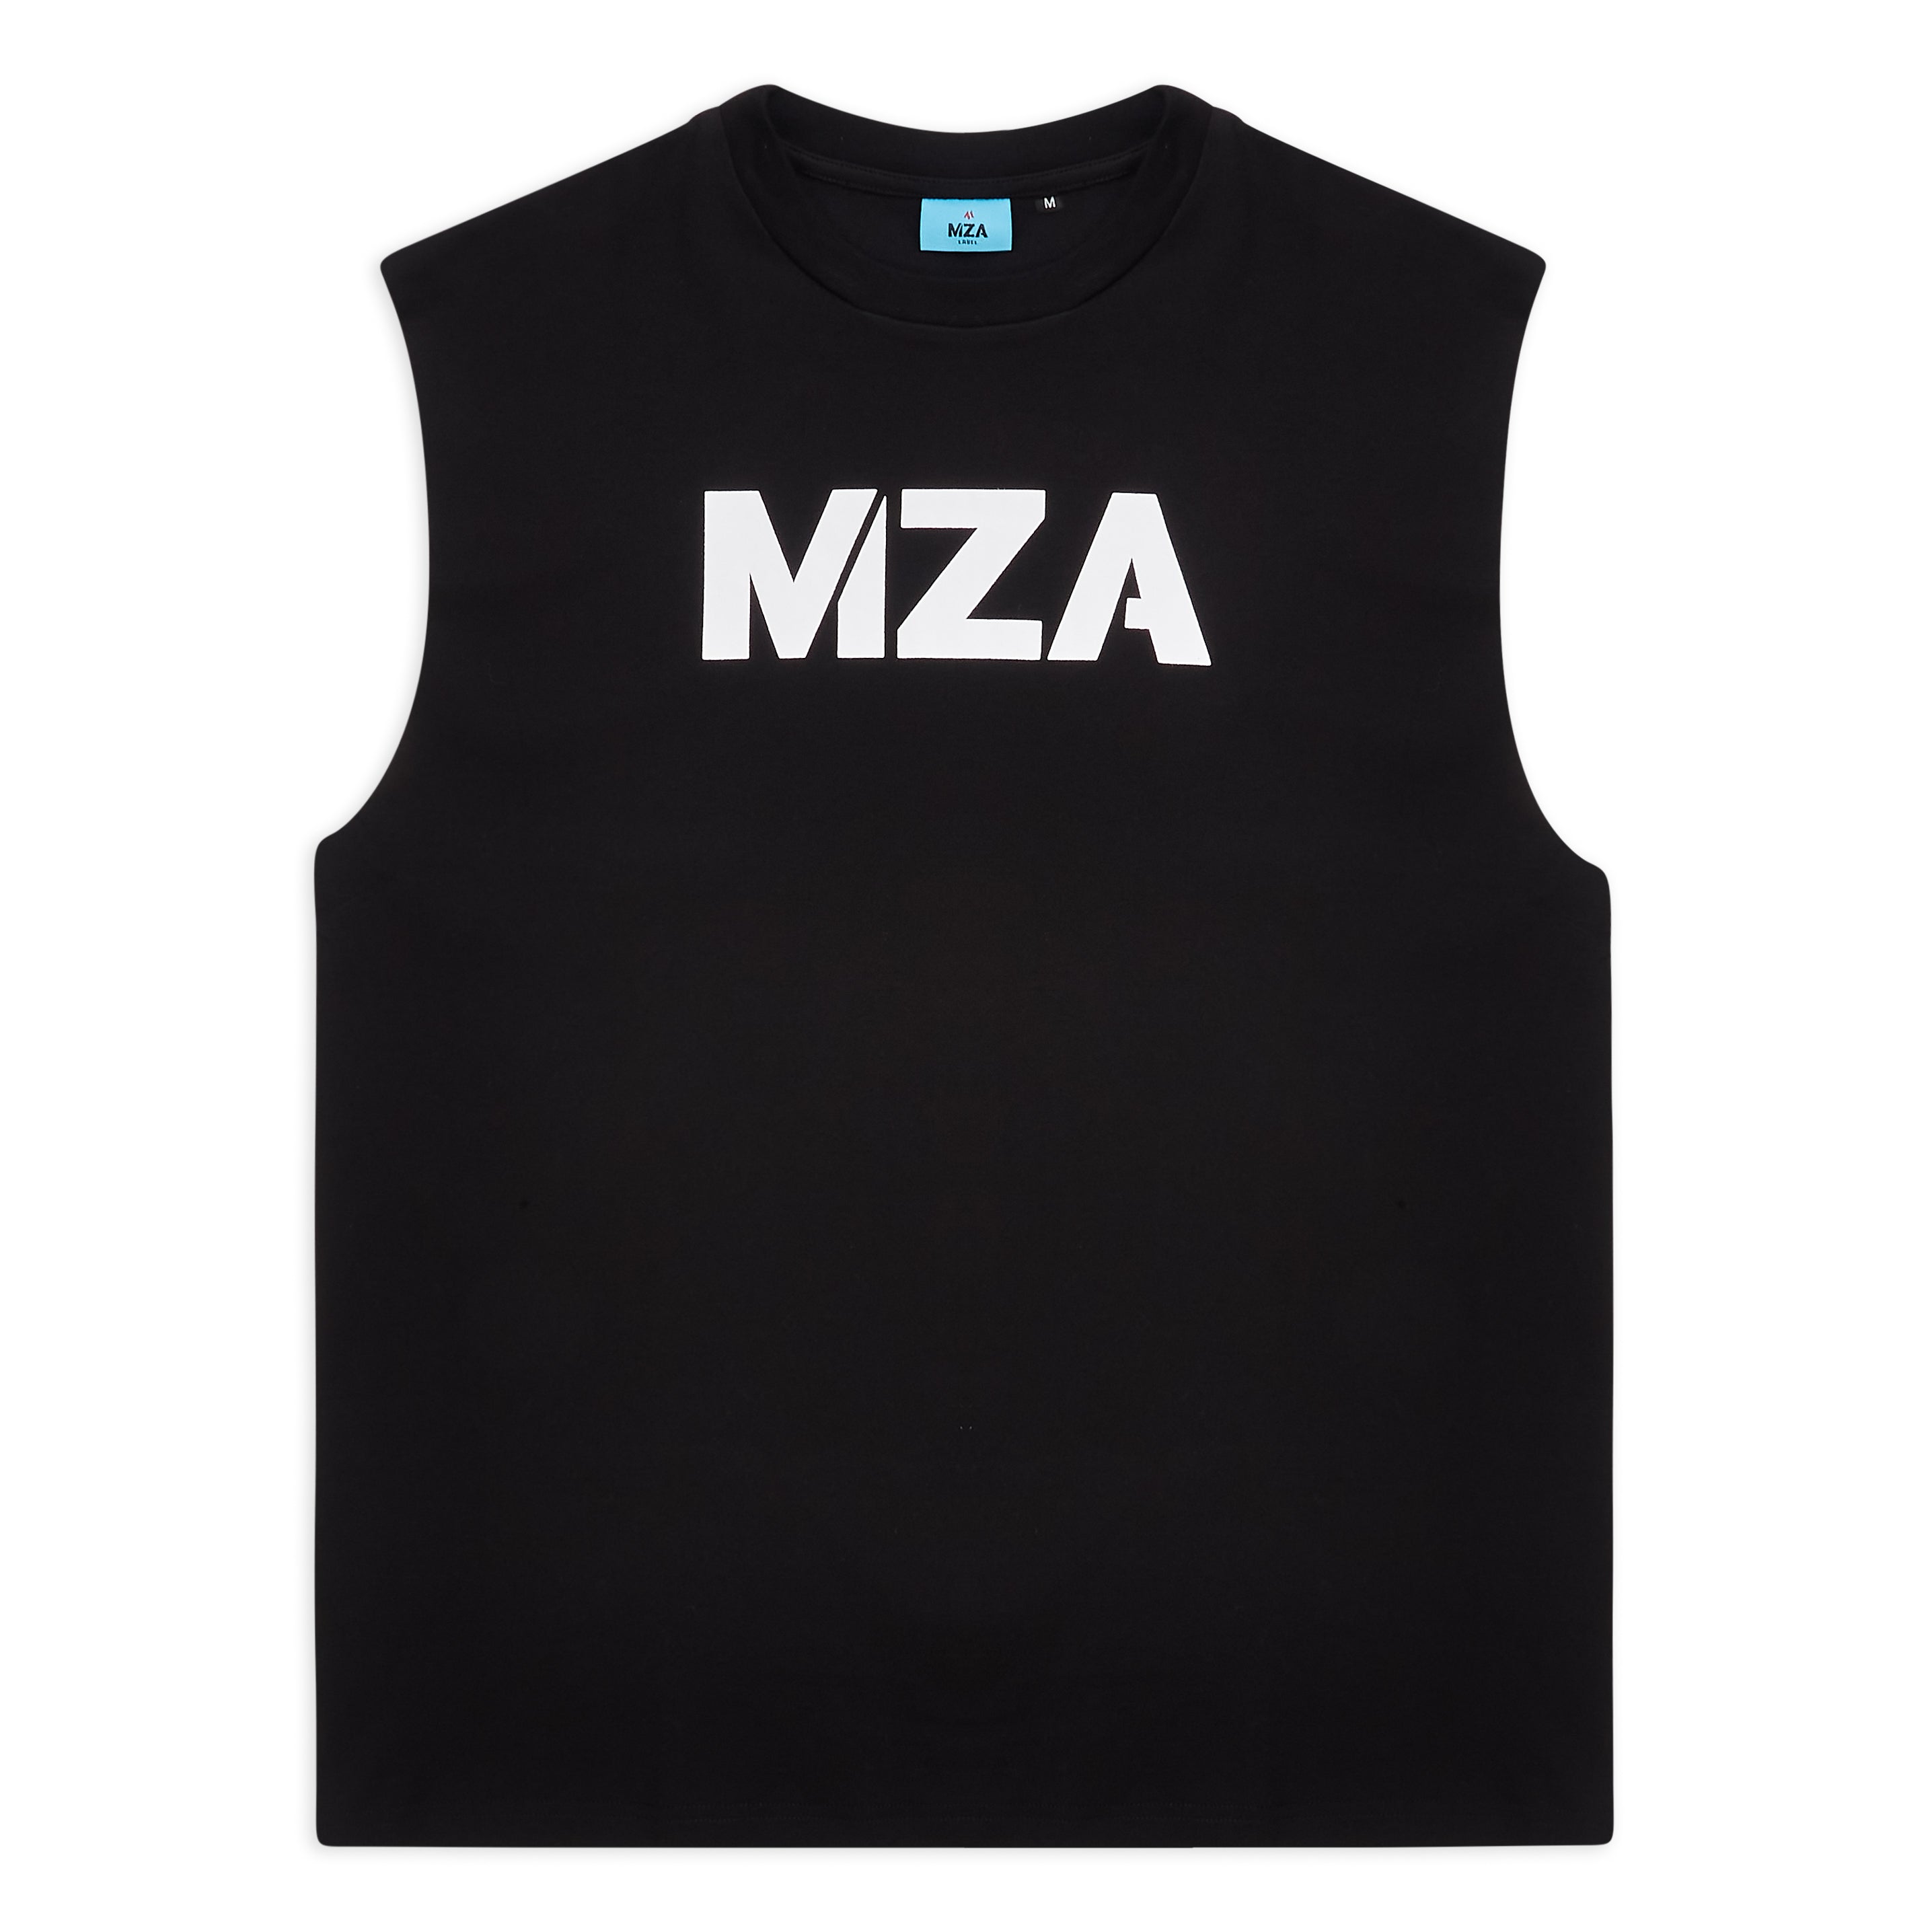 This is a large product image of the front of the new standard vest in black on a white background.  It shows off he large MZA logo on the front of the chest